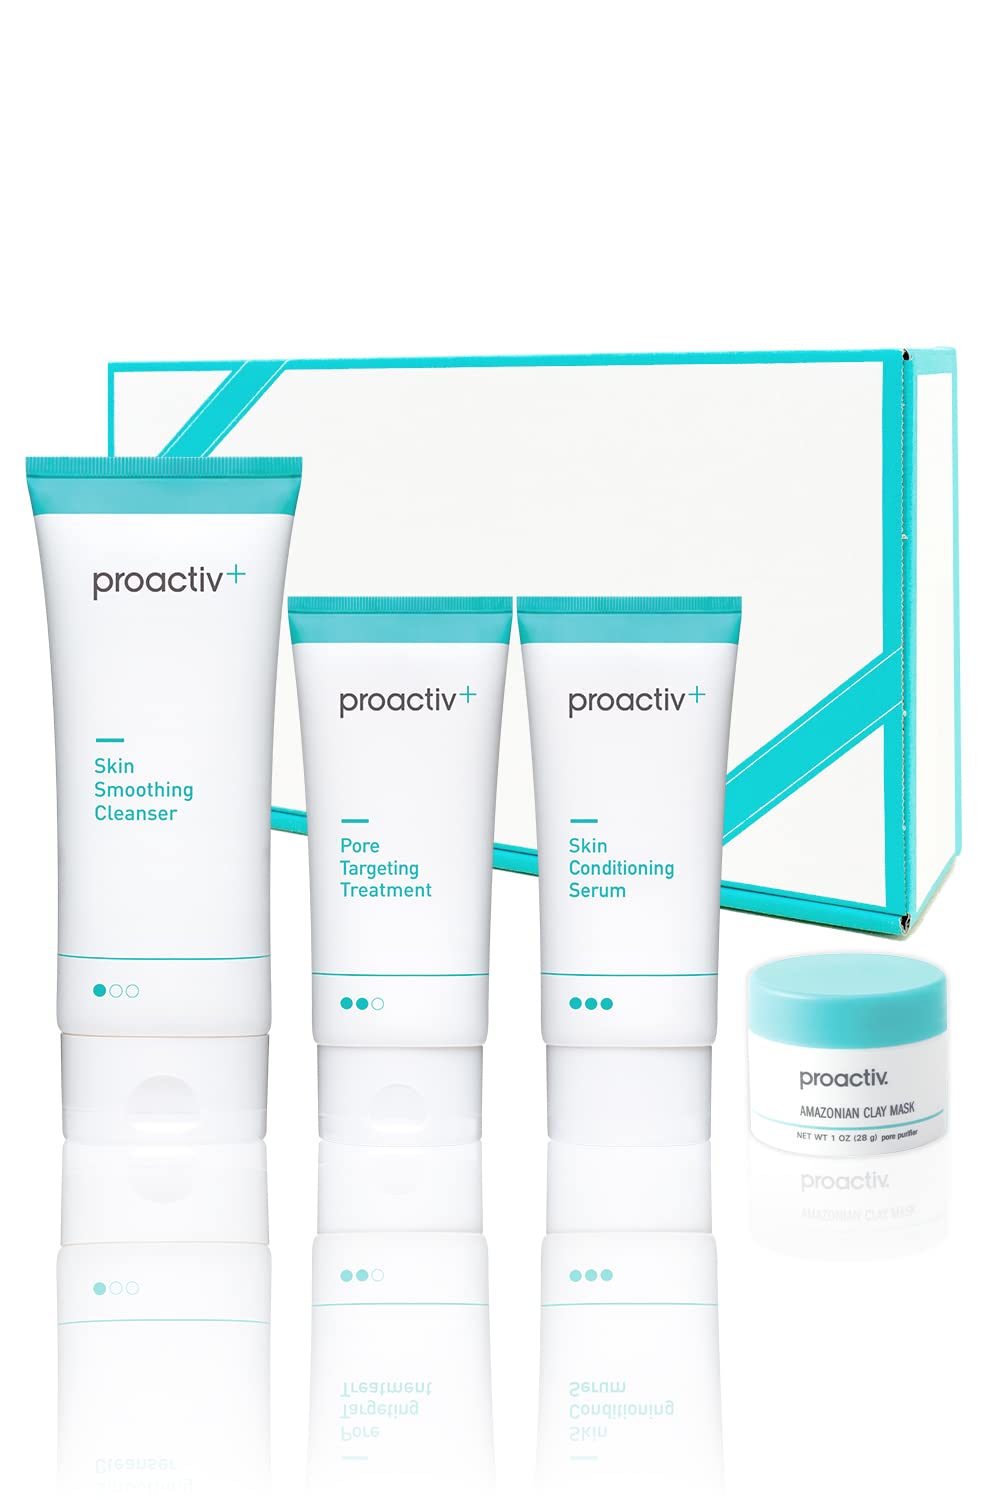 Mua (Old Model) Proactive Medicine Smart Set (90 Day Supply)  Amazonian  Clay Mask (28 g) x 1, Proactiv Acne Skin Smoothing Cleanser (6.3 oz (180  g), Pore Targeting Treatment (3.2